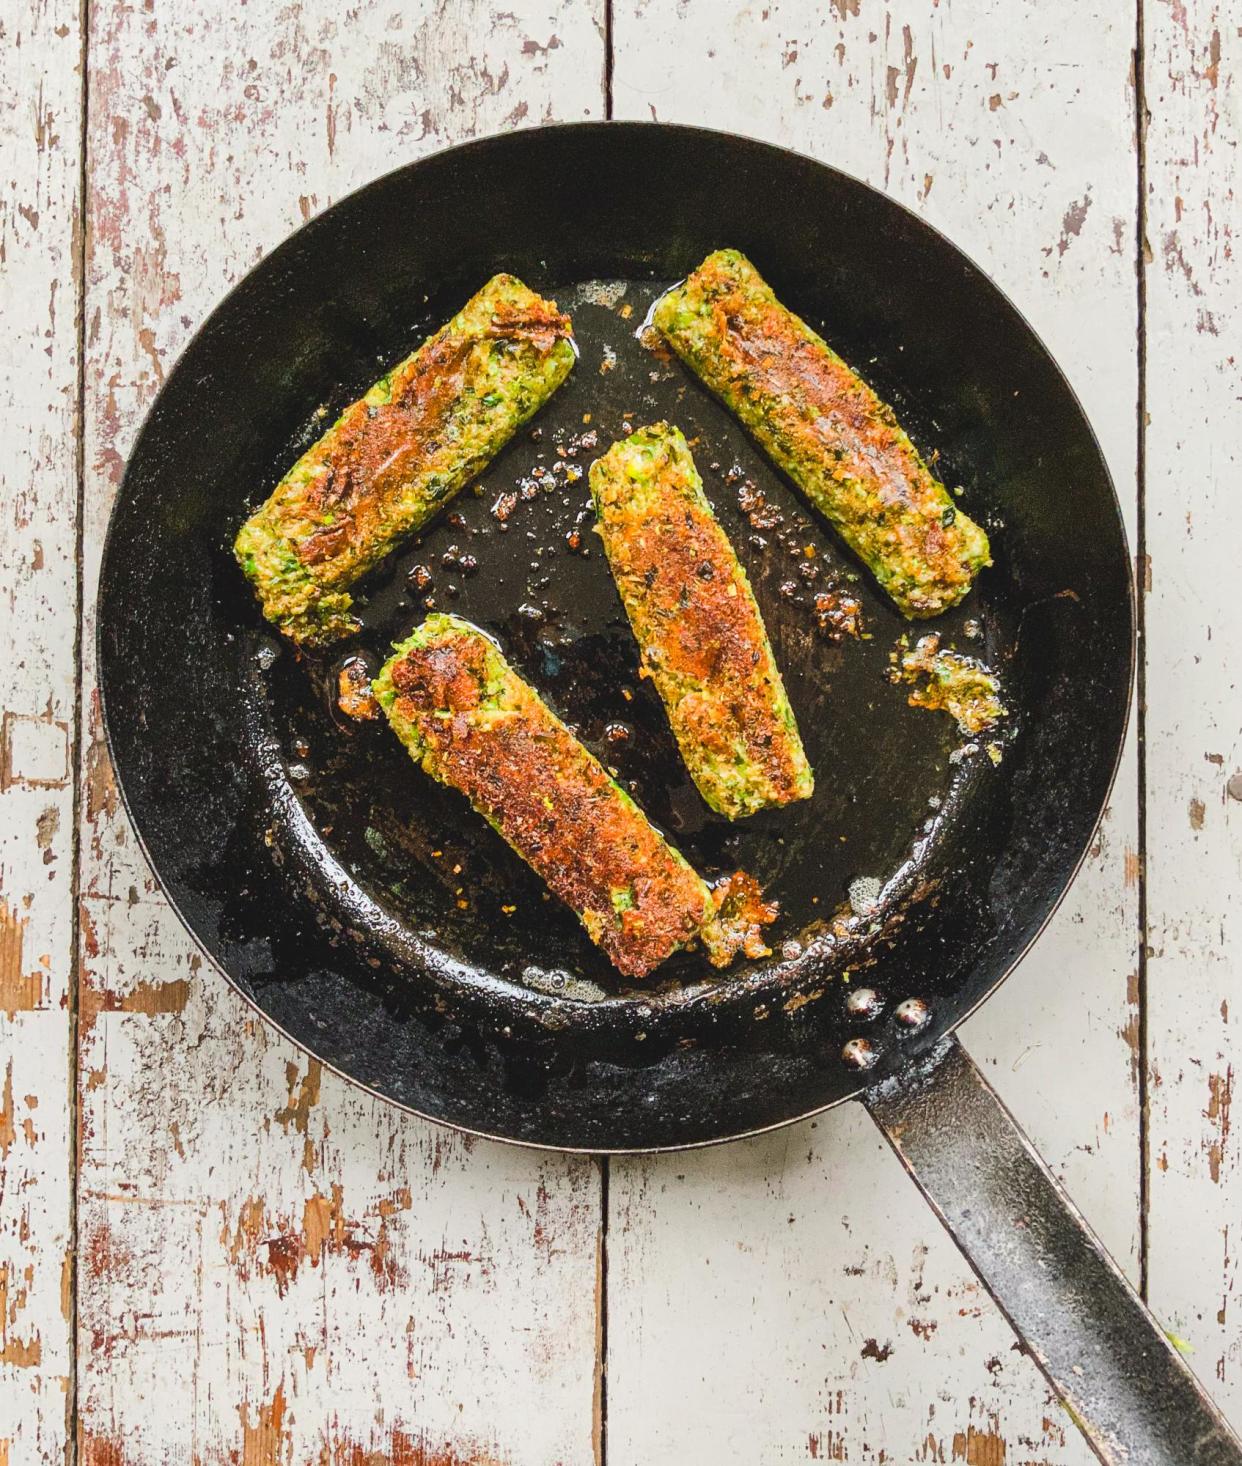 <span>‘A great vegetarian option for breakfast’: Tom Hunt’s Glamorgan sausages made with leftover bread, leek tops and aquafaba.</span><span>Photograph: Tom Hunt/The Guardian</span>